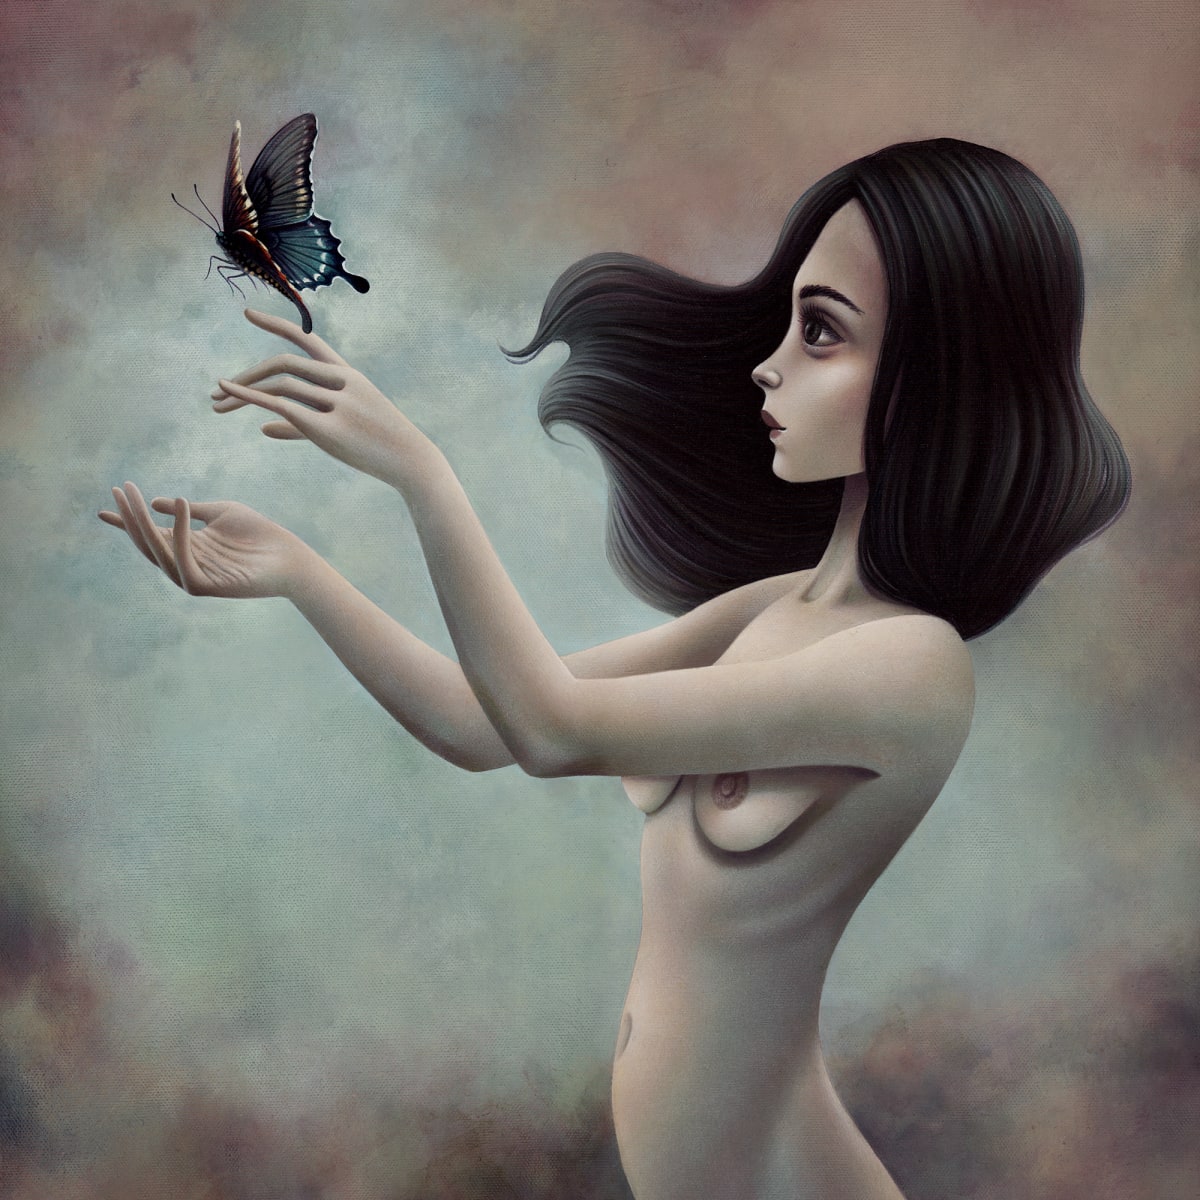 One Day You'll Fly Away by Shannon Bonatakis 